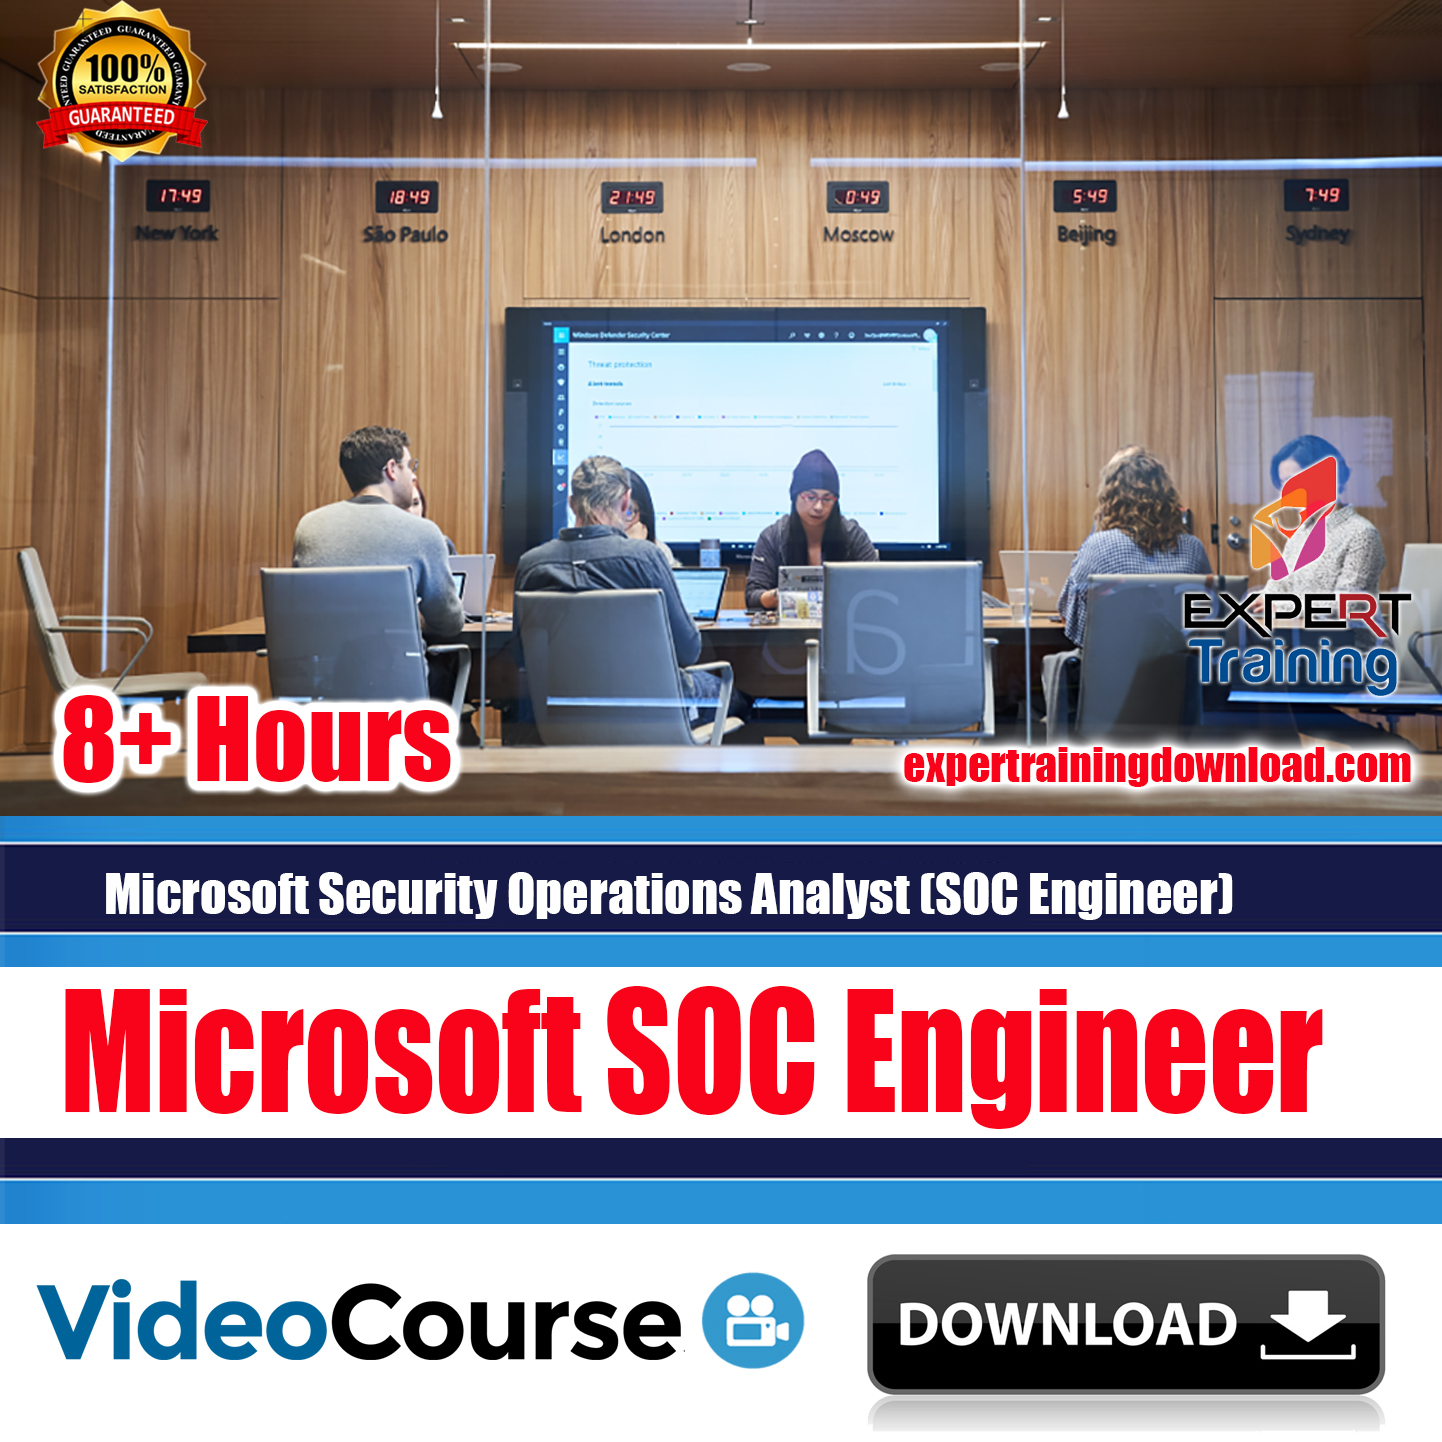 Microsoft Security Operations Analyst (SOC Engineer) Course